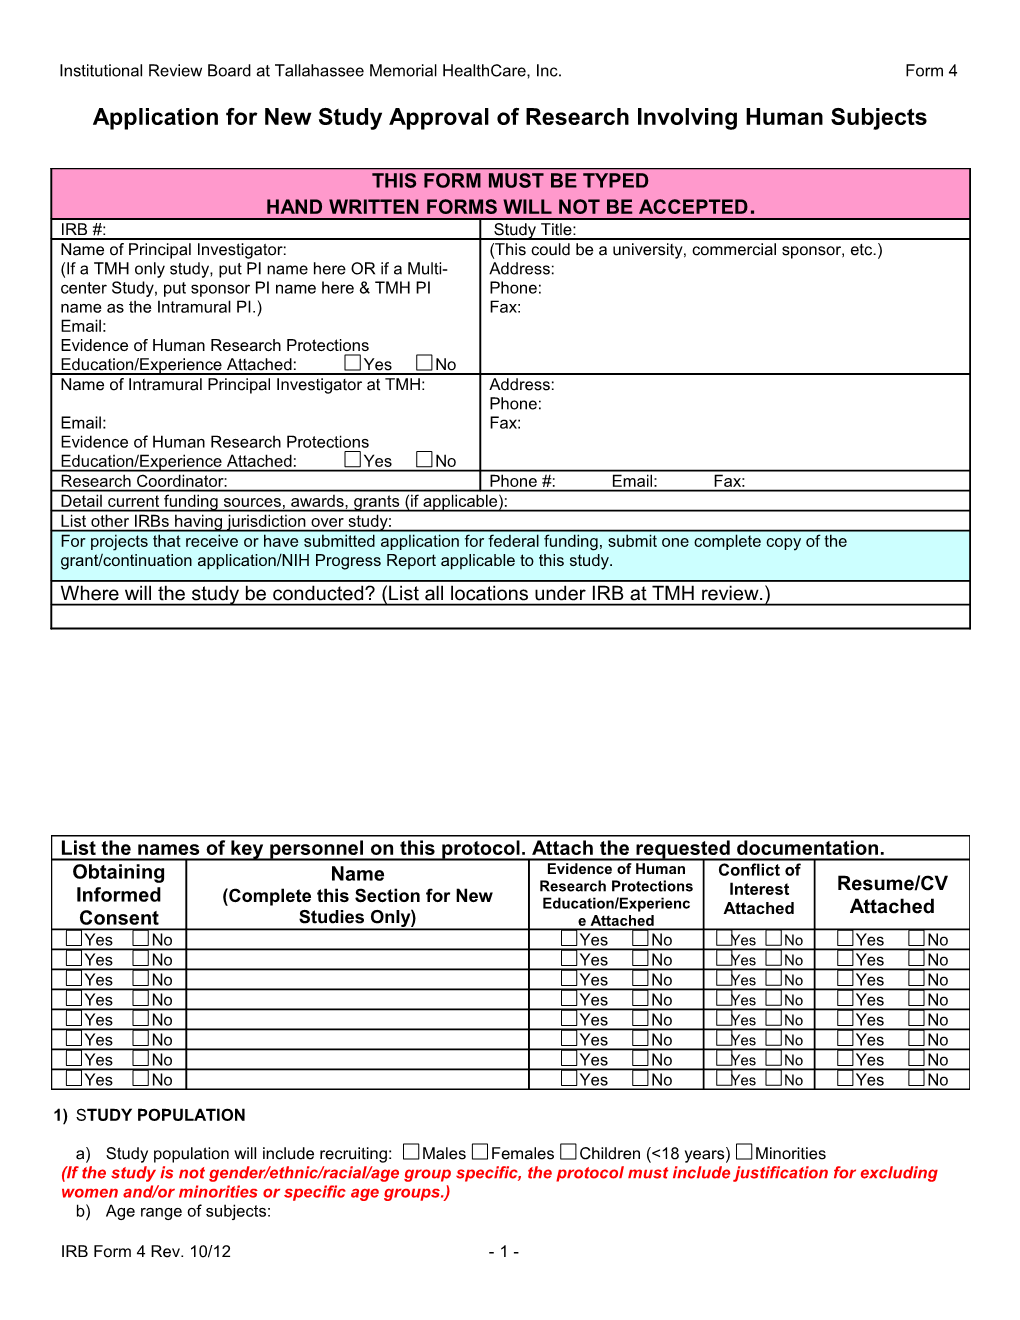 Form 4 Application for Approval of Research Involving Human Subjects